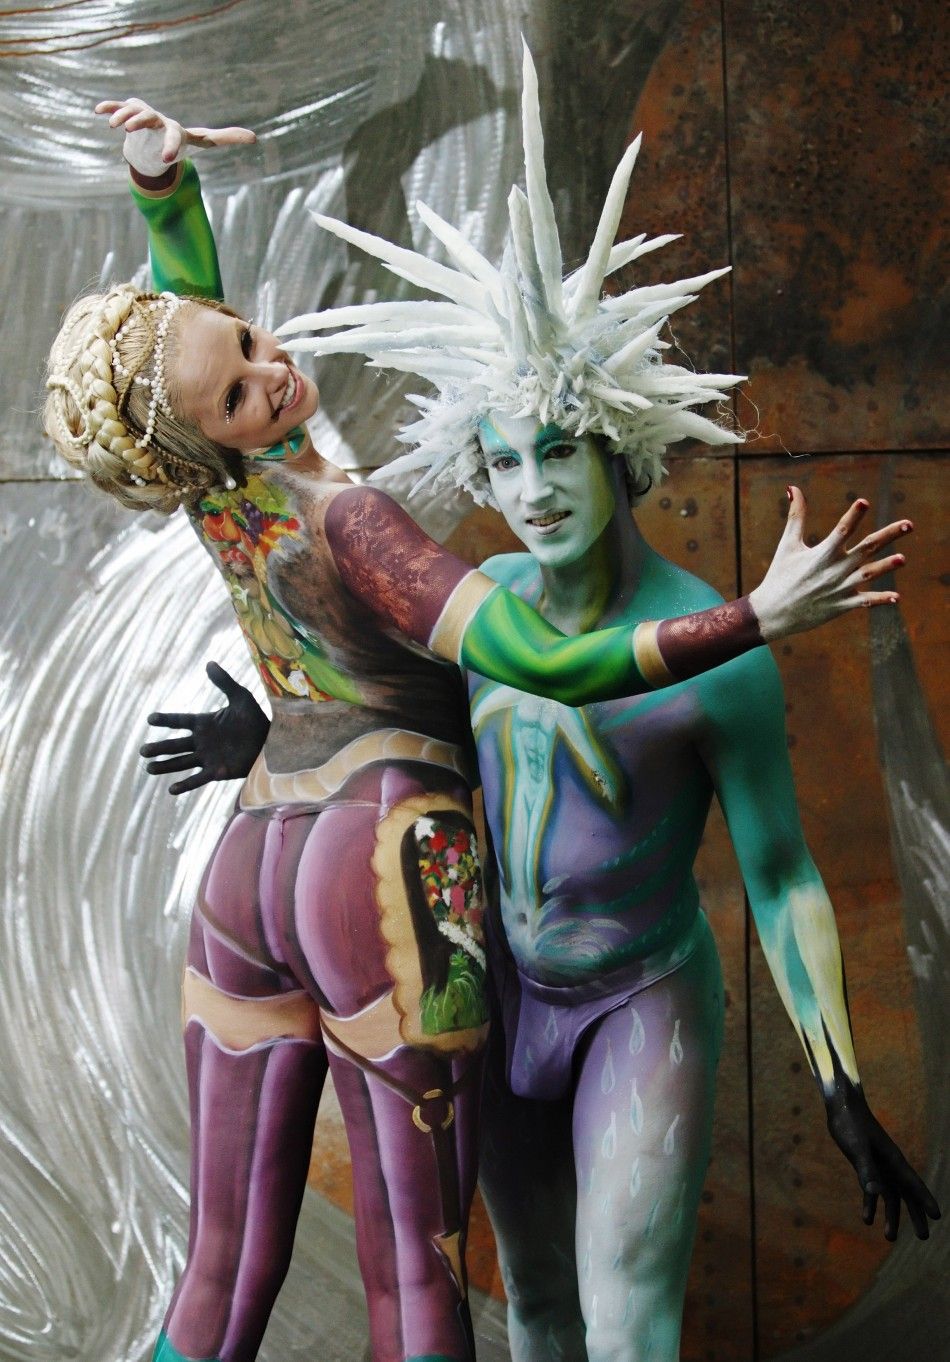 Models pose during the annual World Bodypainting Festival in Poertschach